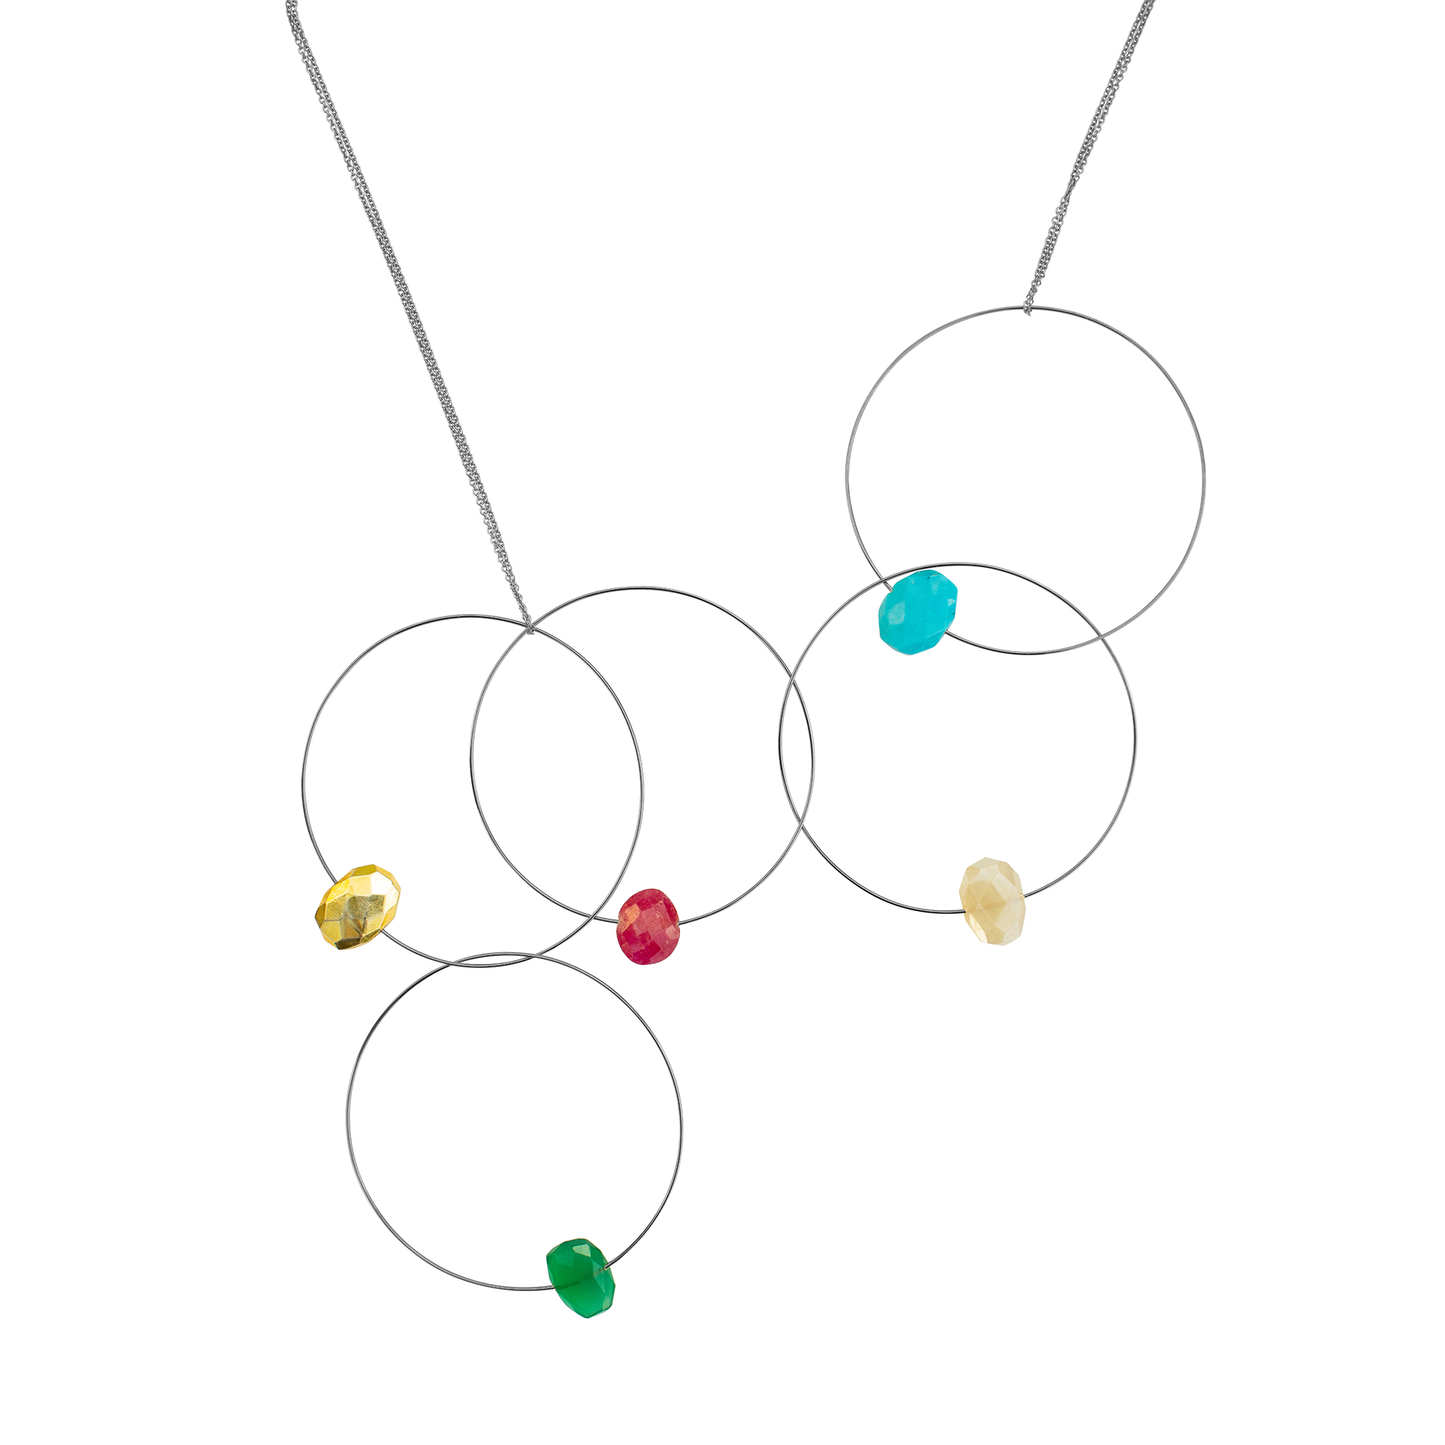 'Morph it!' Necklace with Colourful Gemstones